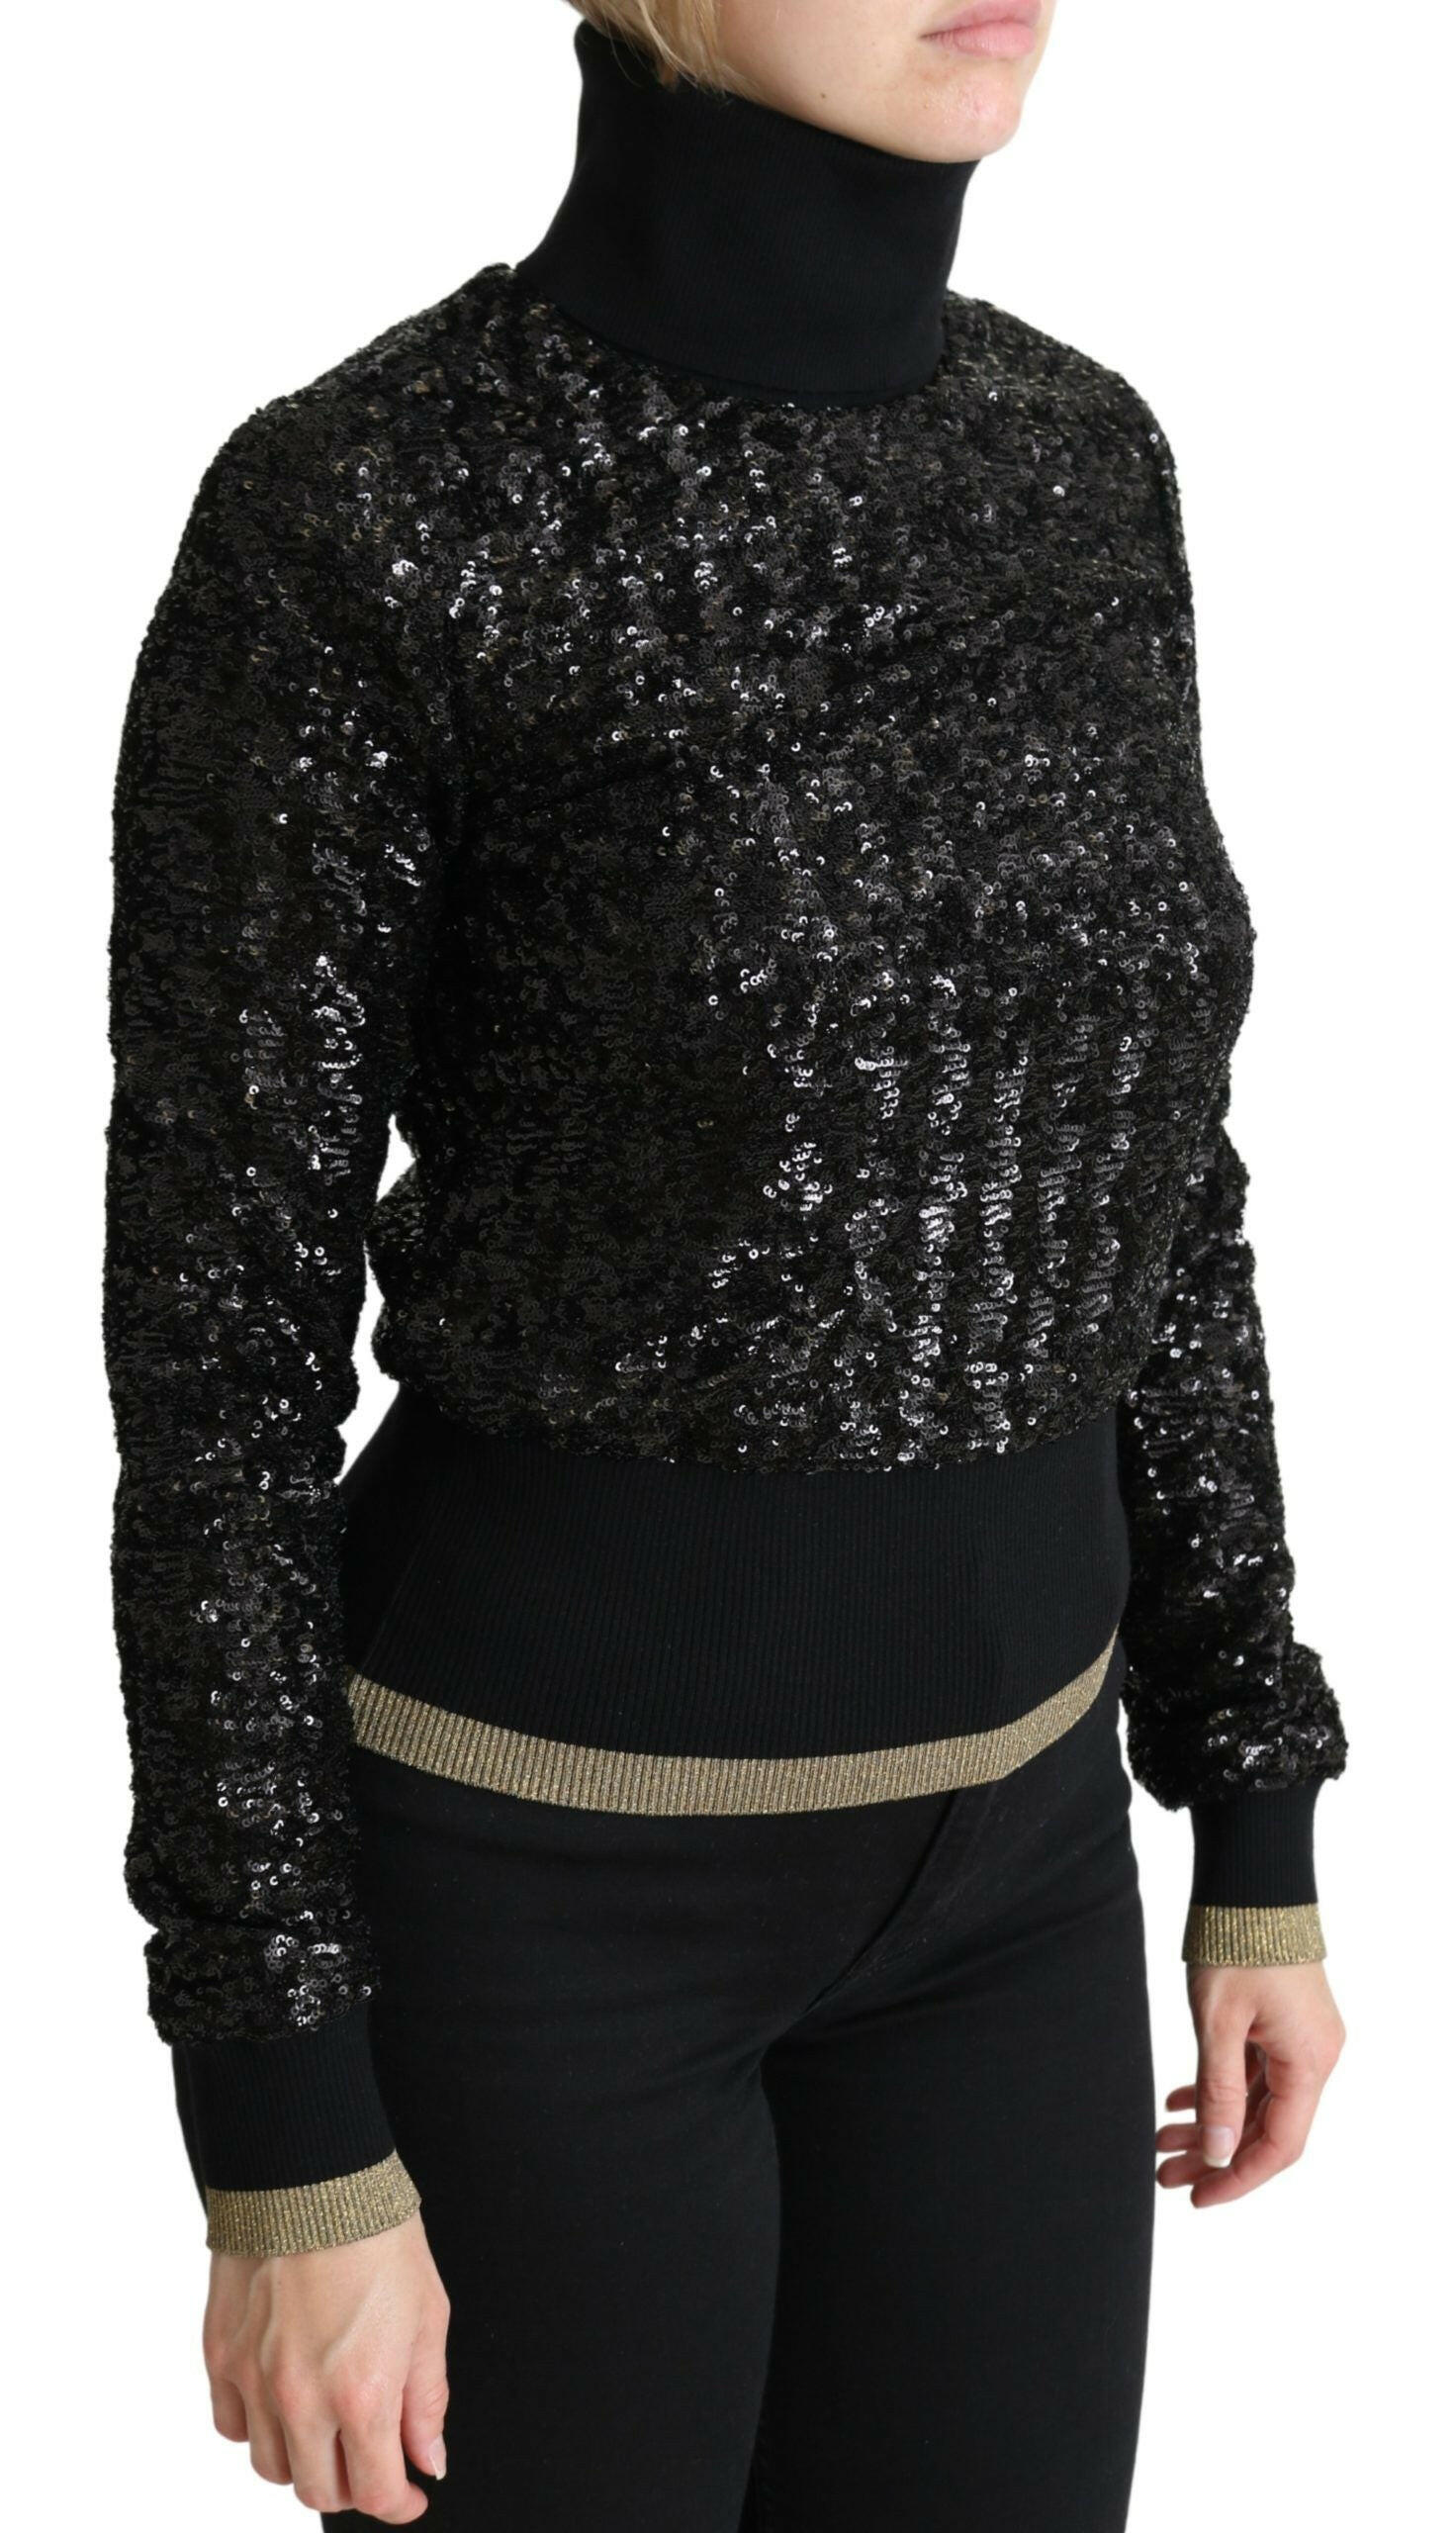 Dolce & Gabbana Black Sequined Knitted Turtle Neck Sweater - GENUINE AUTHENTIC BRAND LLC  